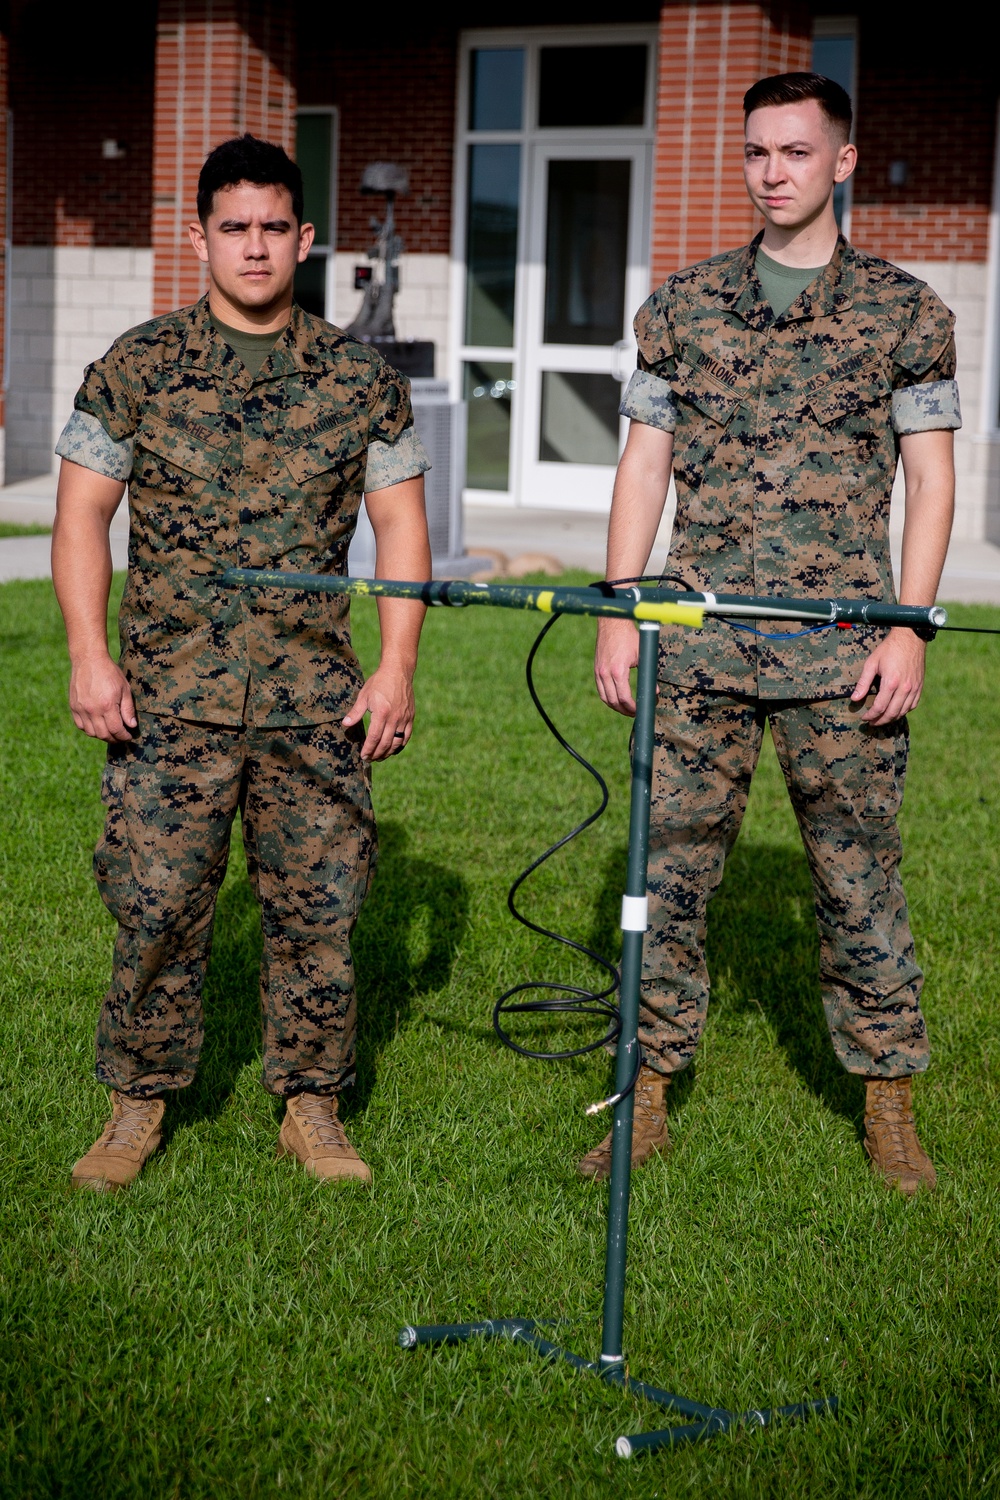 Task force Marines place first in innovation challenge